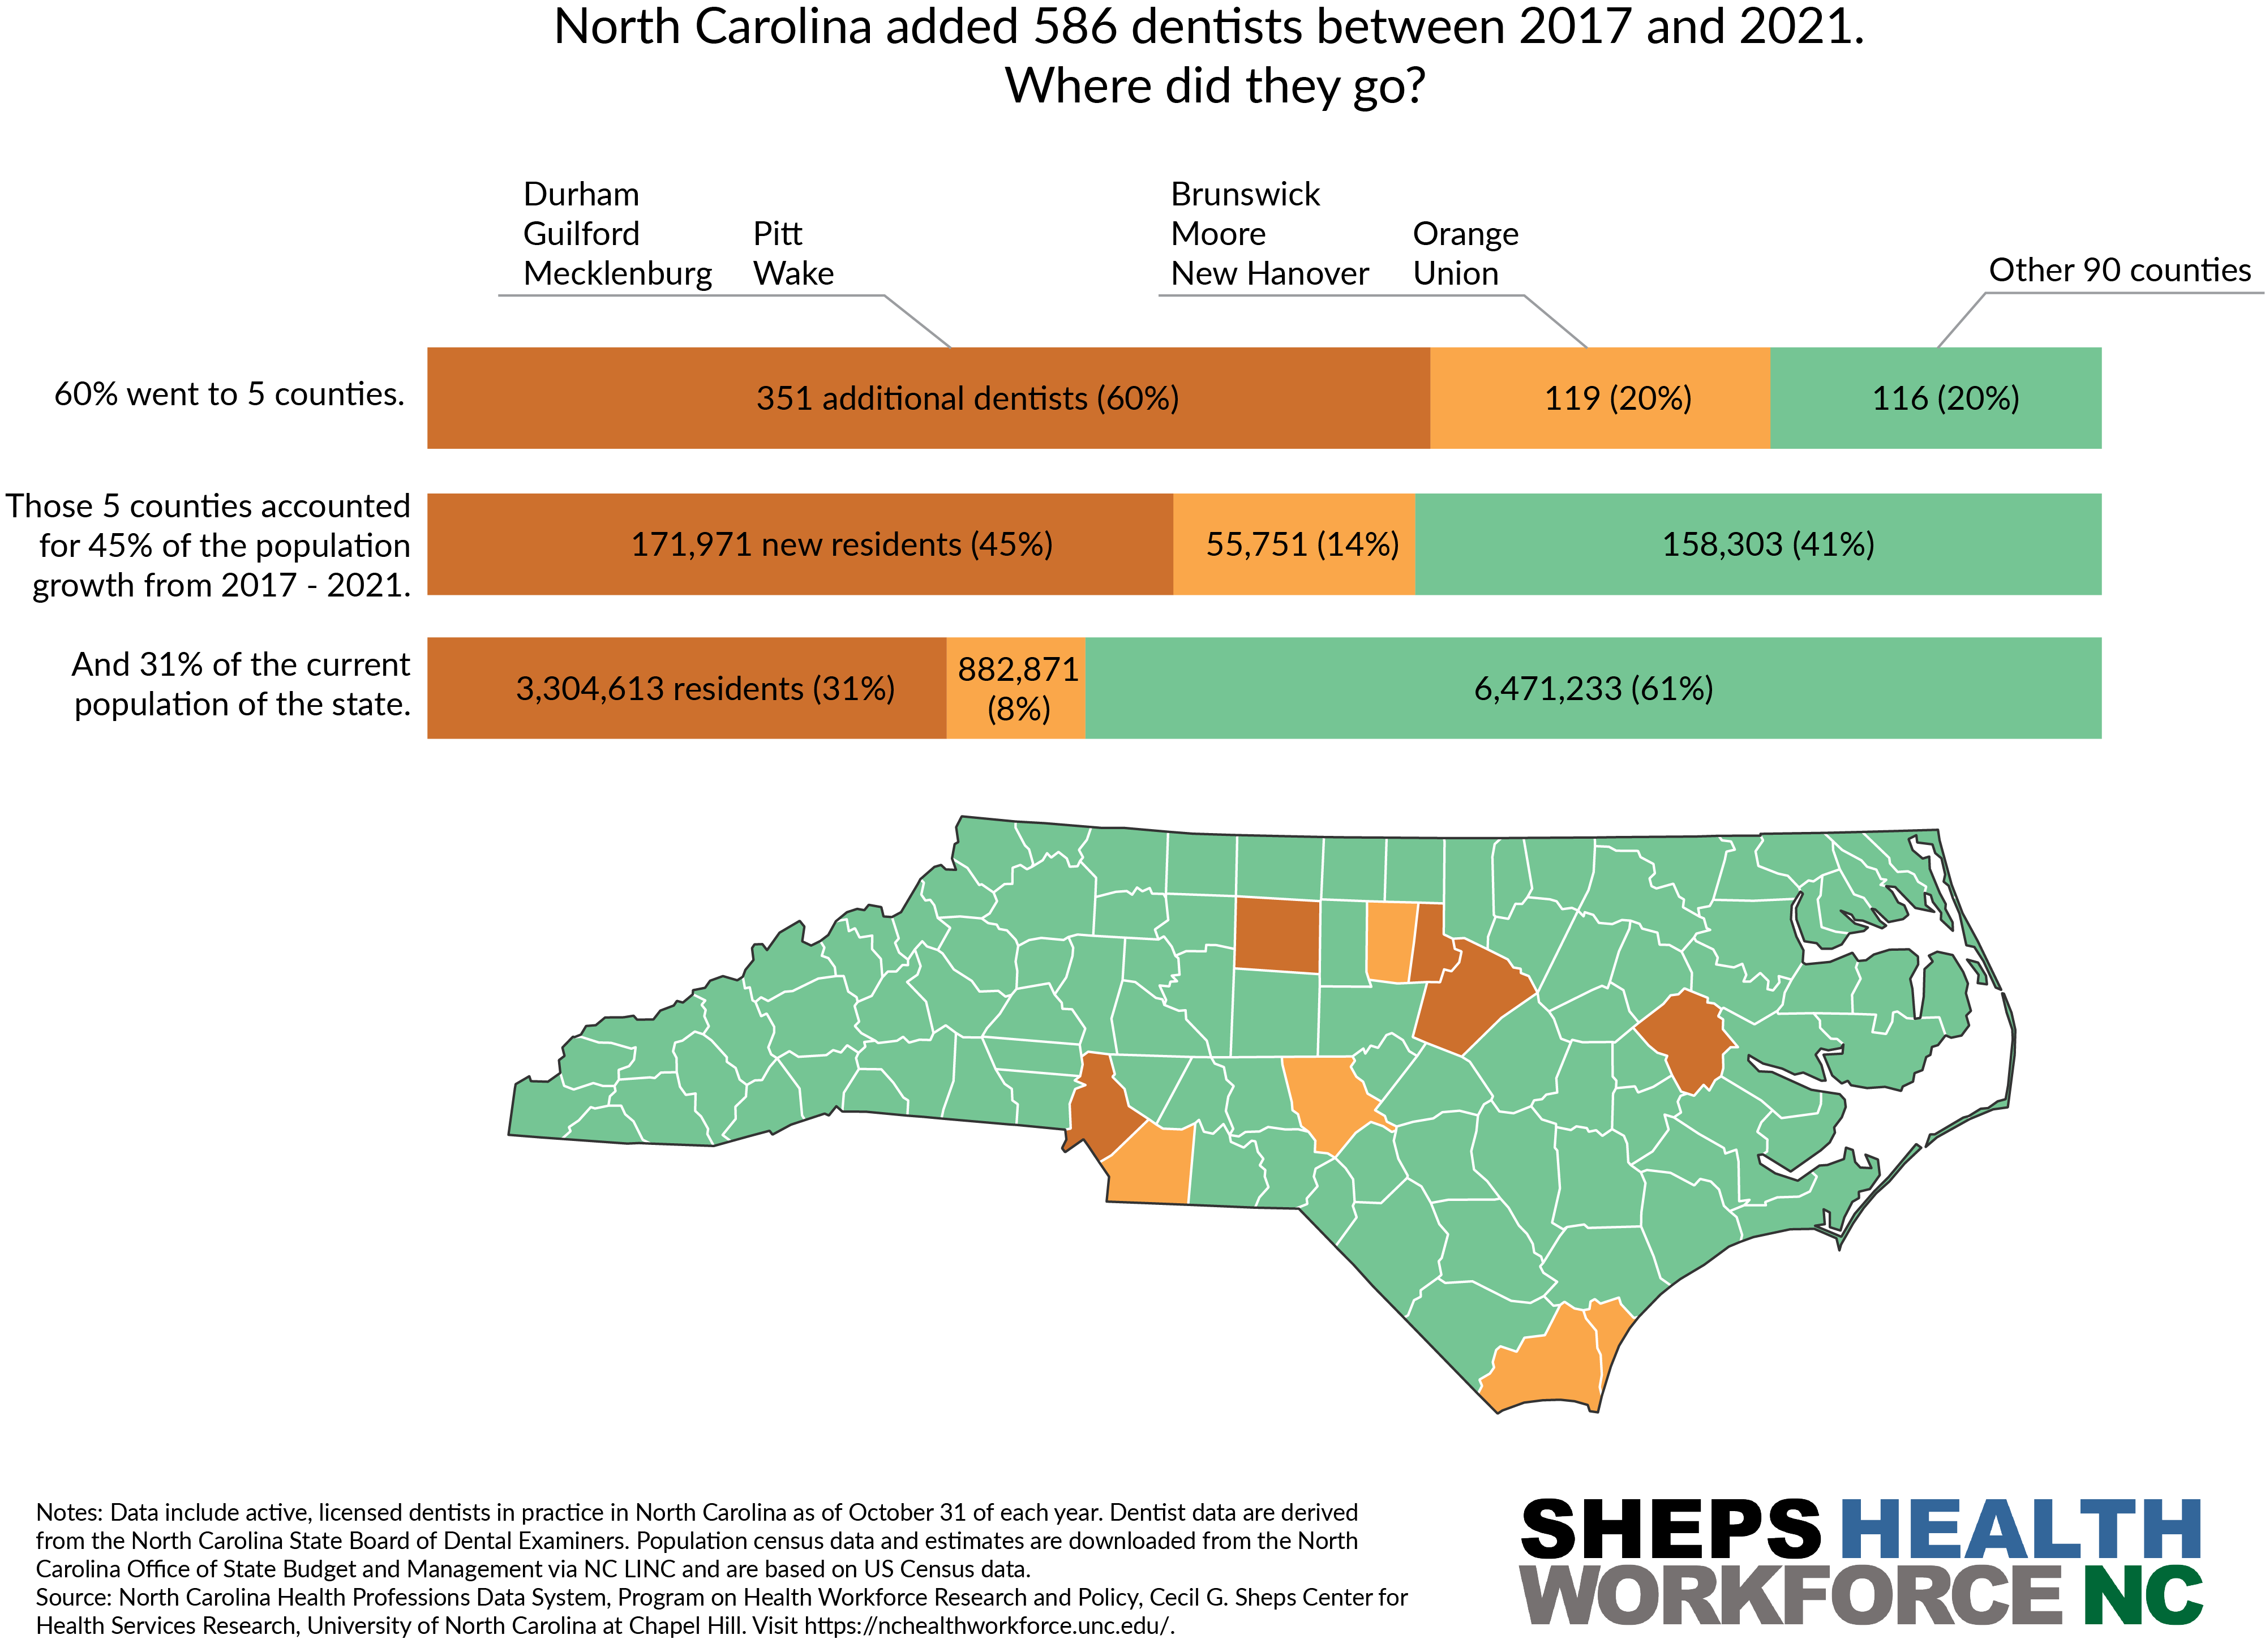 North Carolina increased the supply of dentists by 586 between 2017 and 2021. 60% went to 5 counties representing 31% of the population.